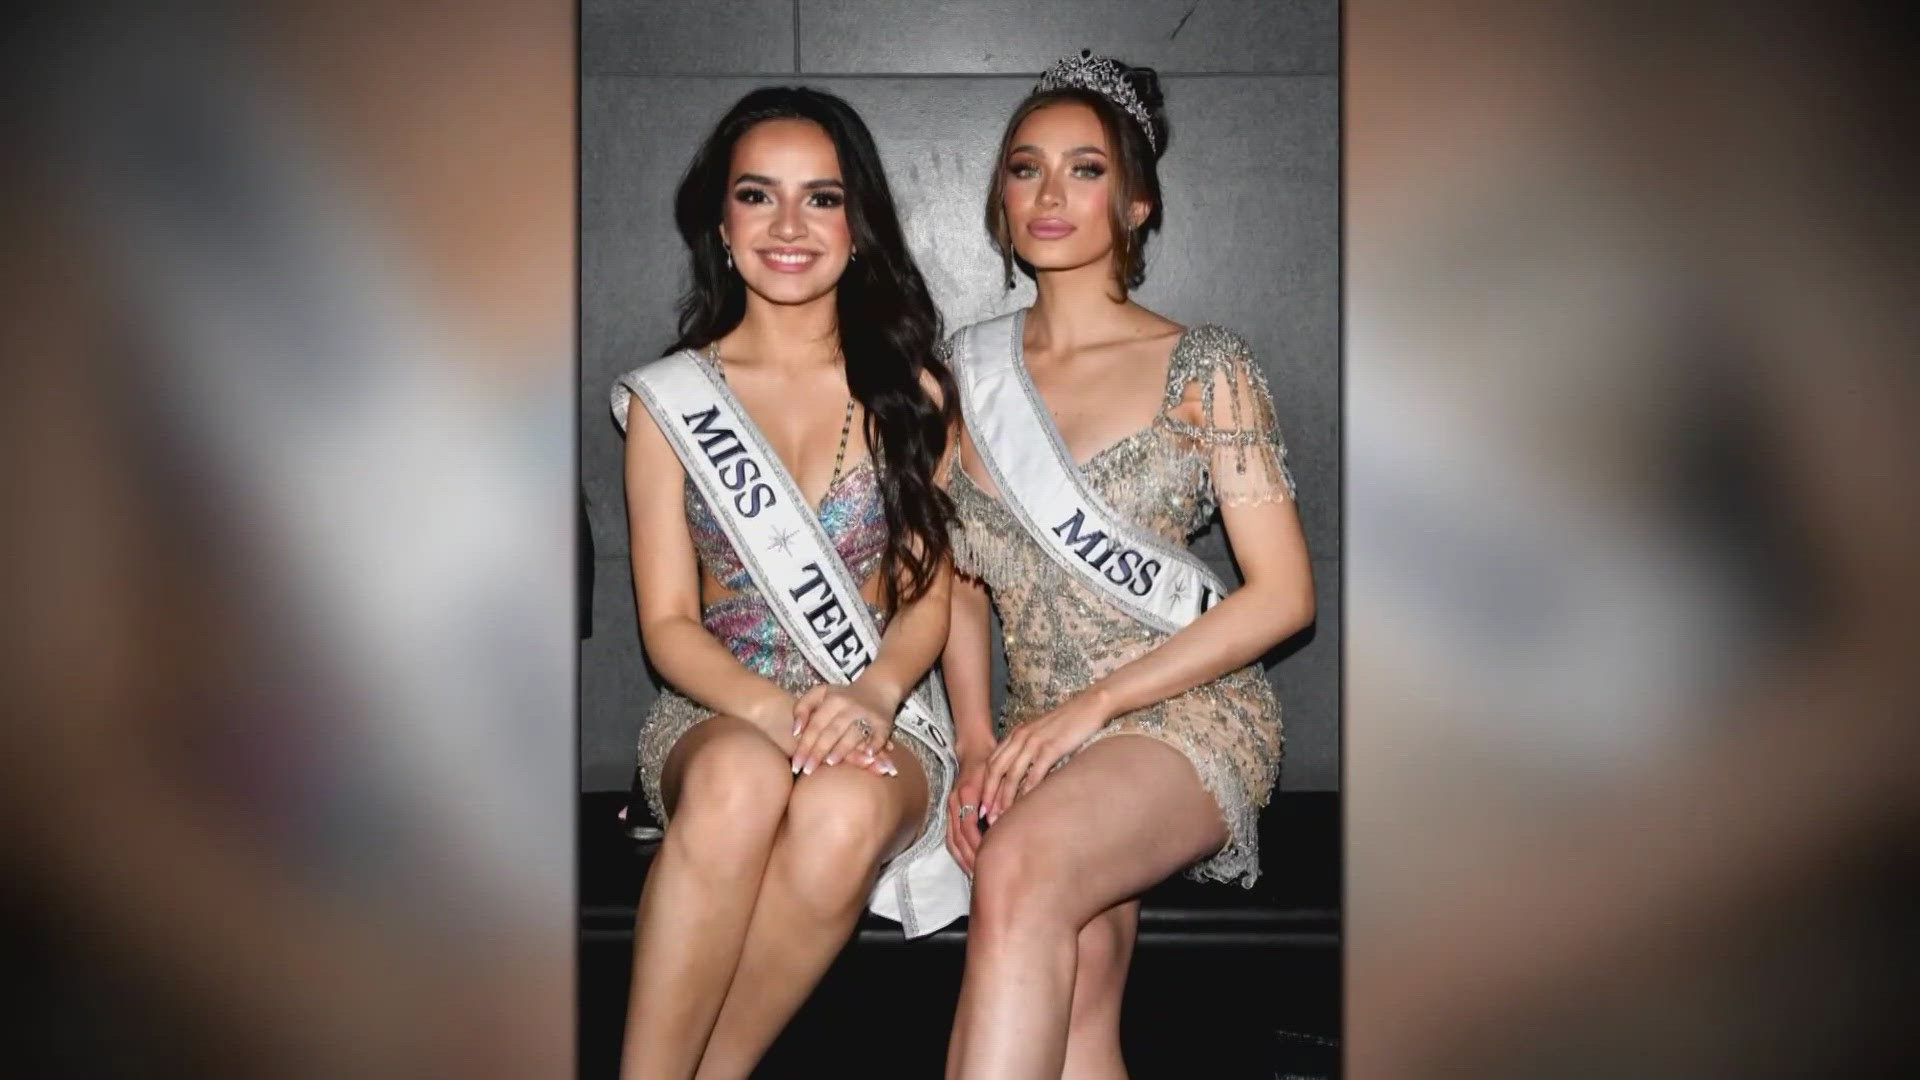 Two major resignations for the Miss U-S-A organization. The new information we're learning about what may have caused the pair to quit only days apart.